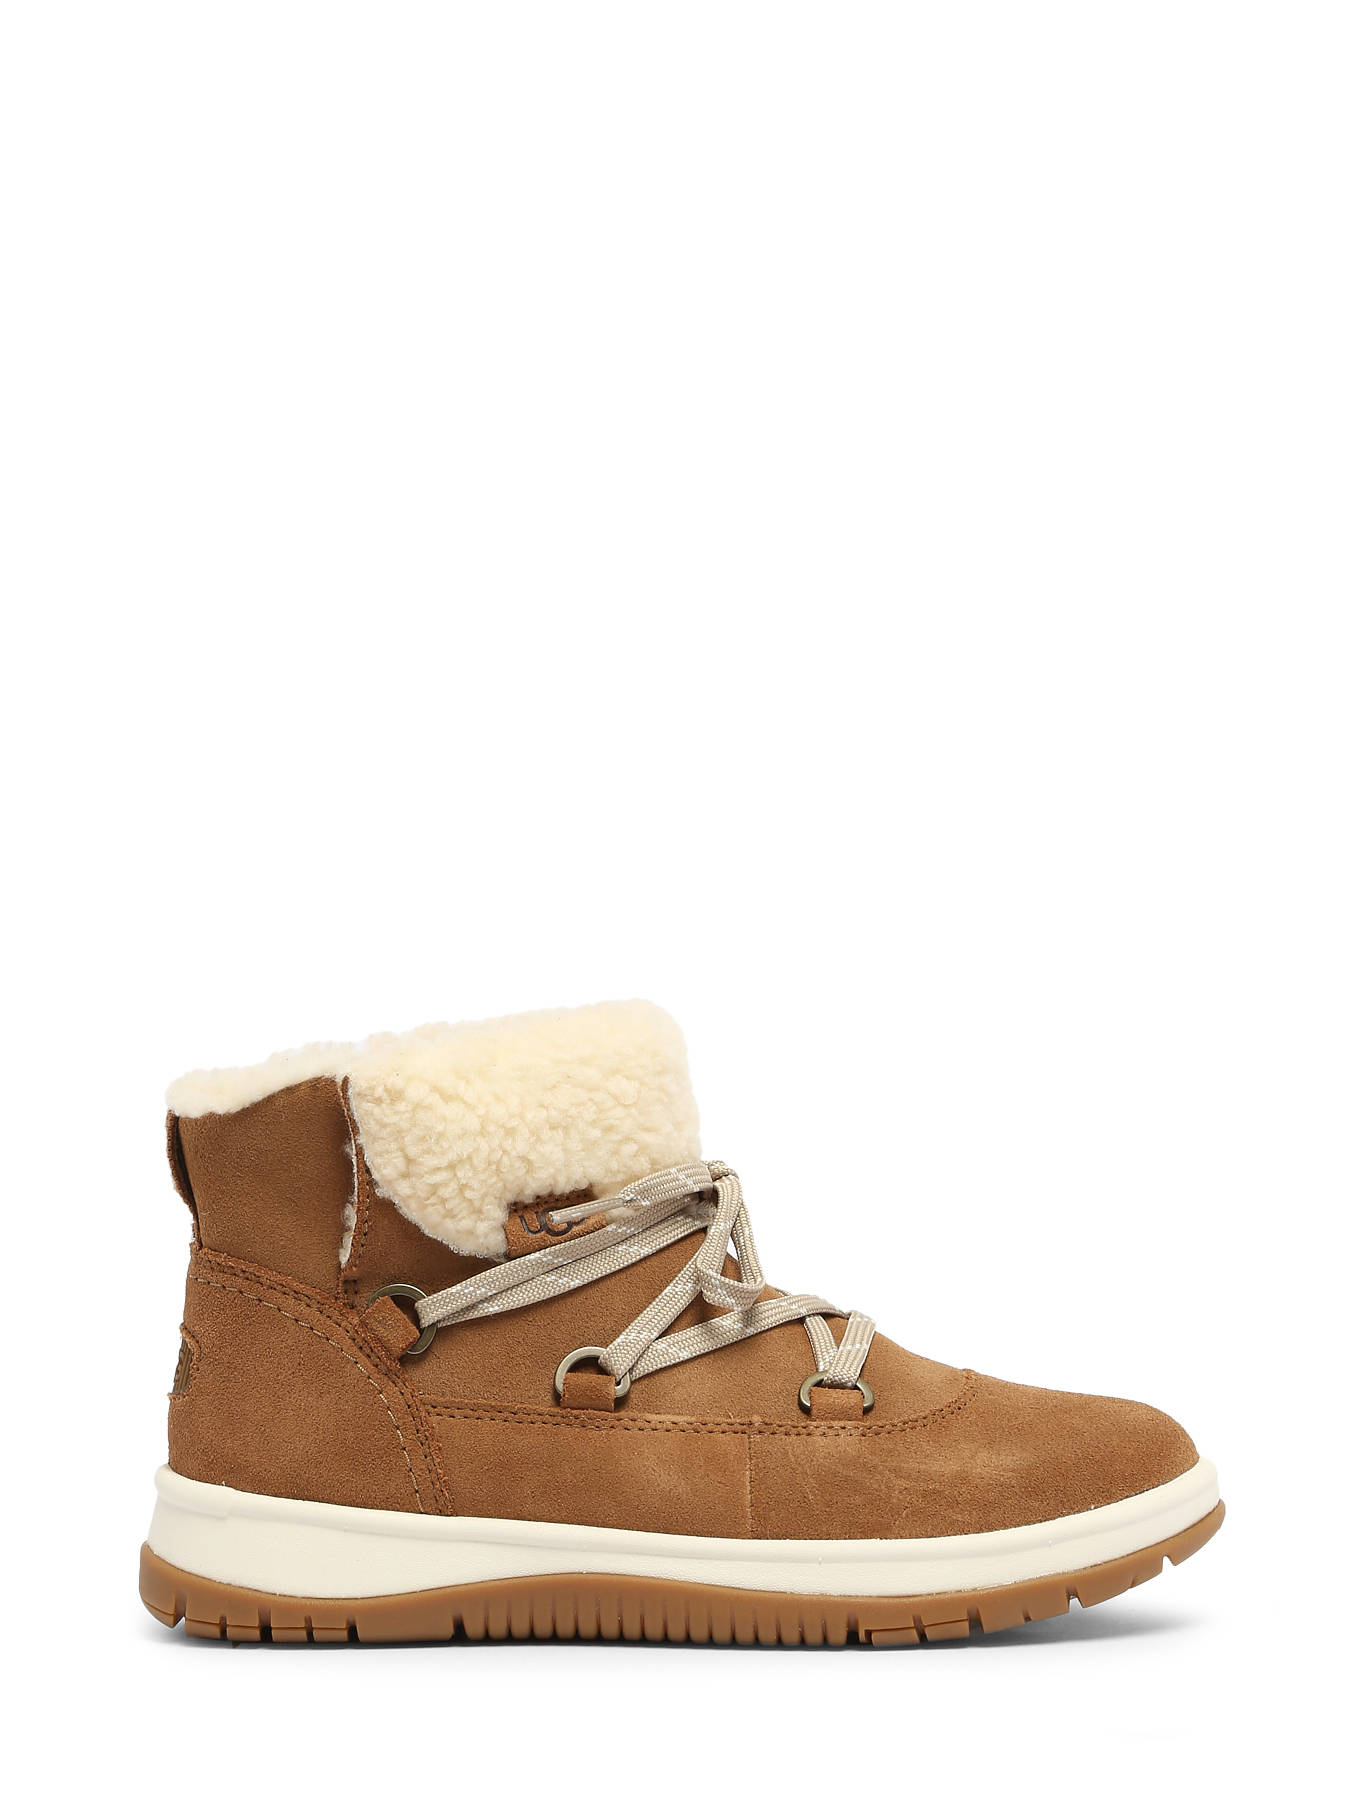 Ugg Boots W LAKESIDER HERITAGE - best prices